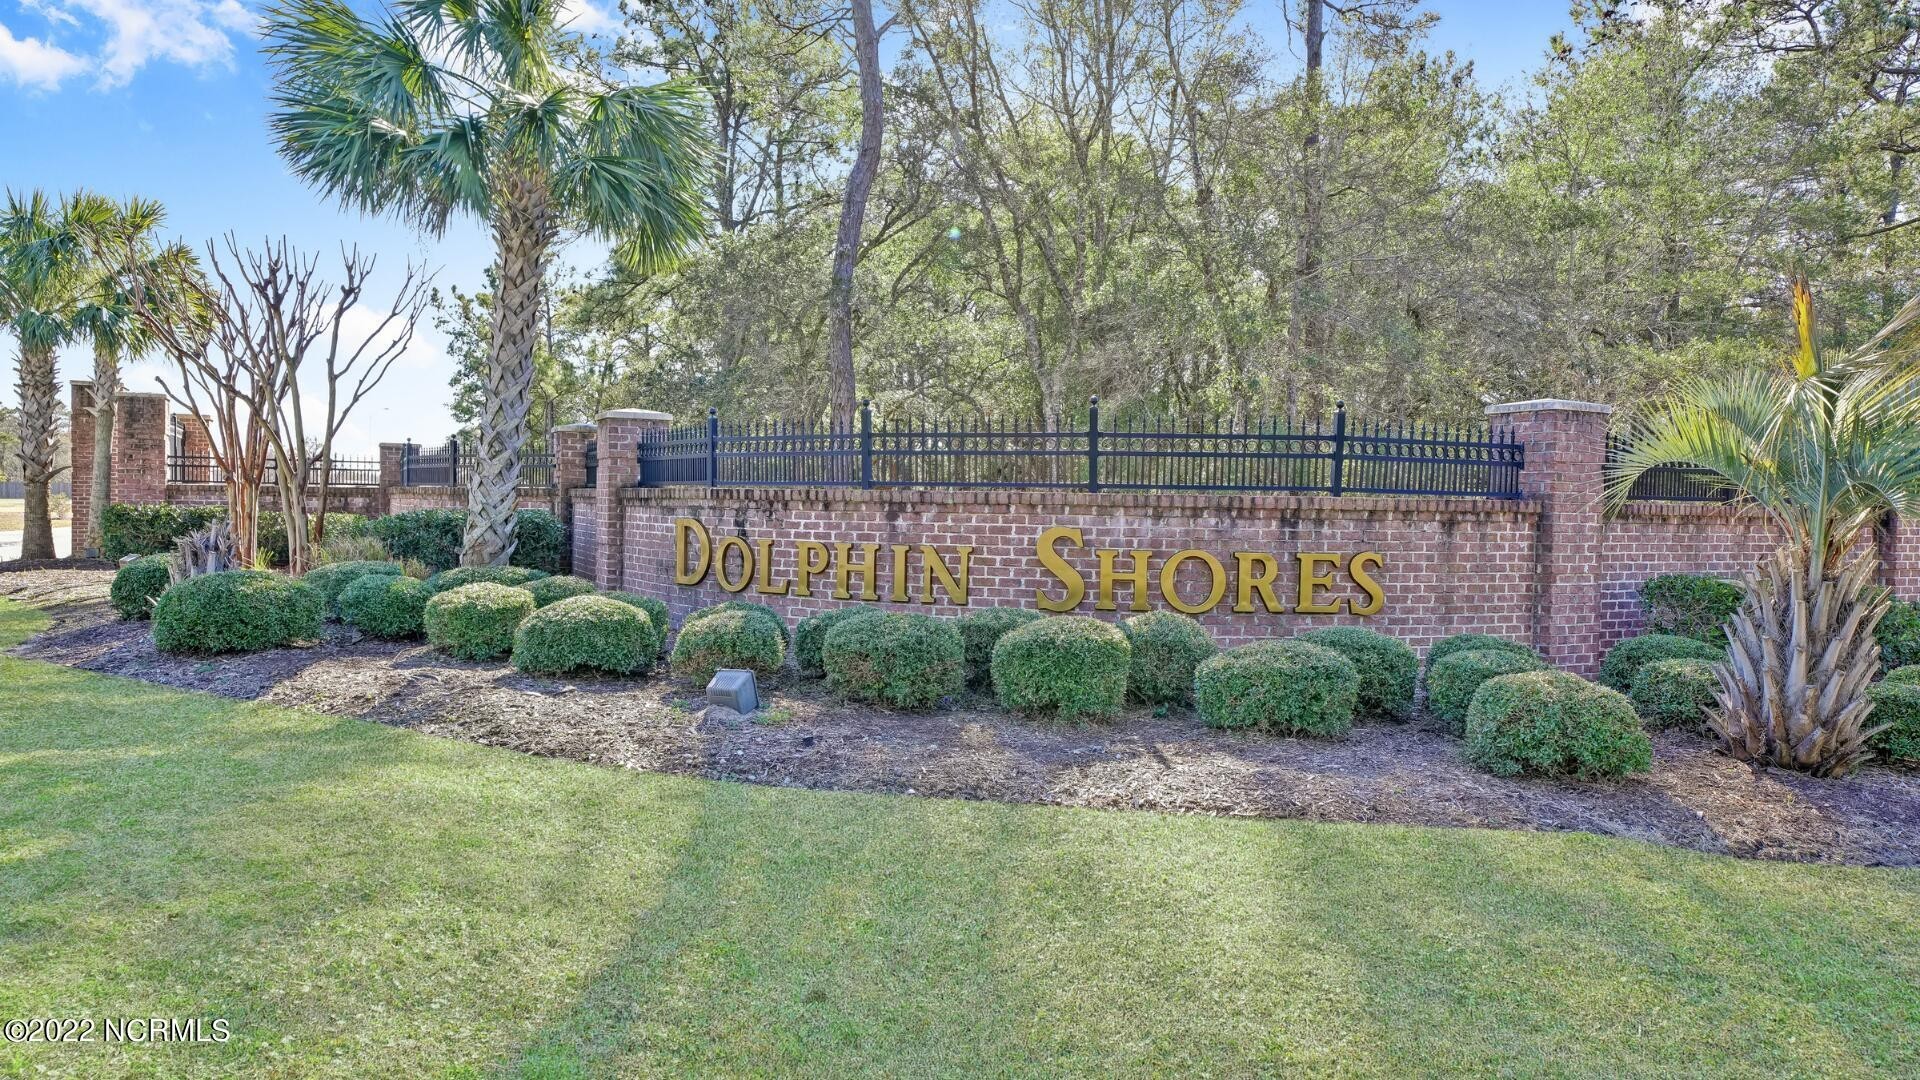 27. 2272 Dolphin Shores Drive SW